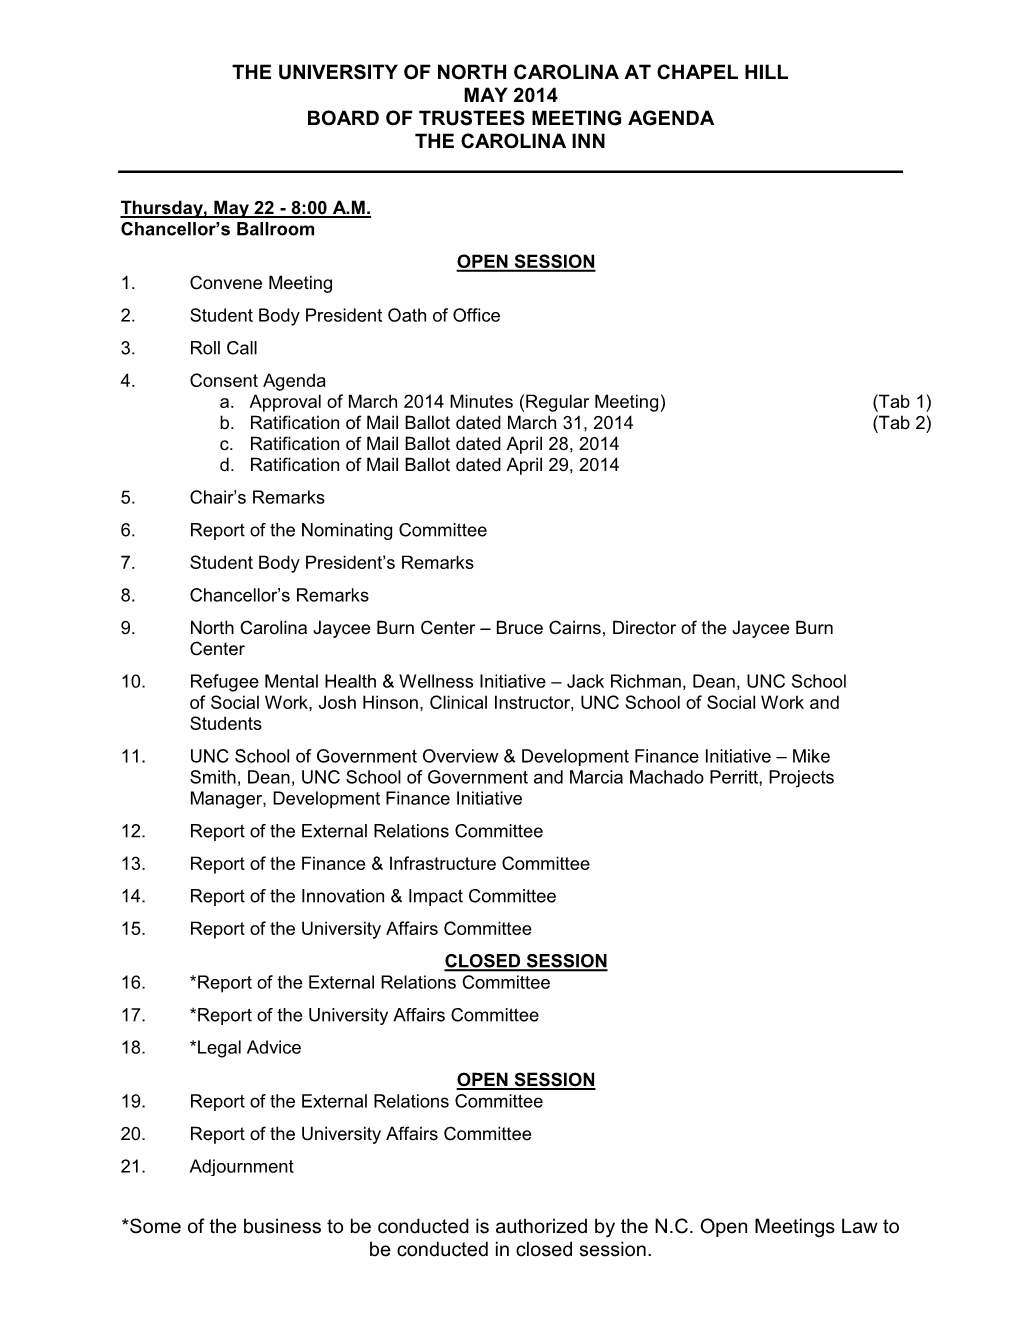 THE UNIVERSITY of NORTH CAROLINA at CHAPEL HILL MAY 2014 BOARD of TRUSTEES MEETING AGENDA the CAROLINA INN *Some of the Business